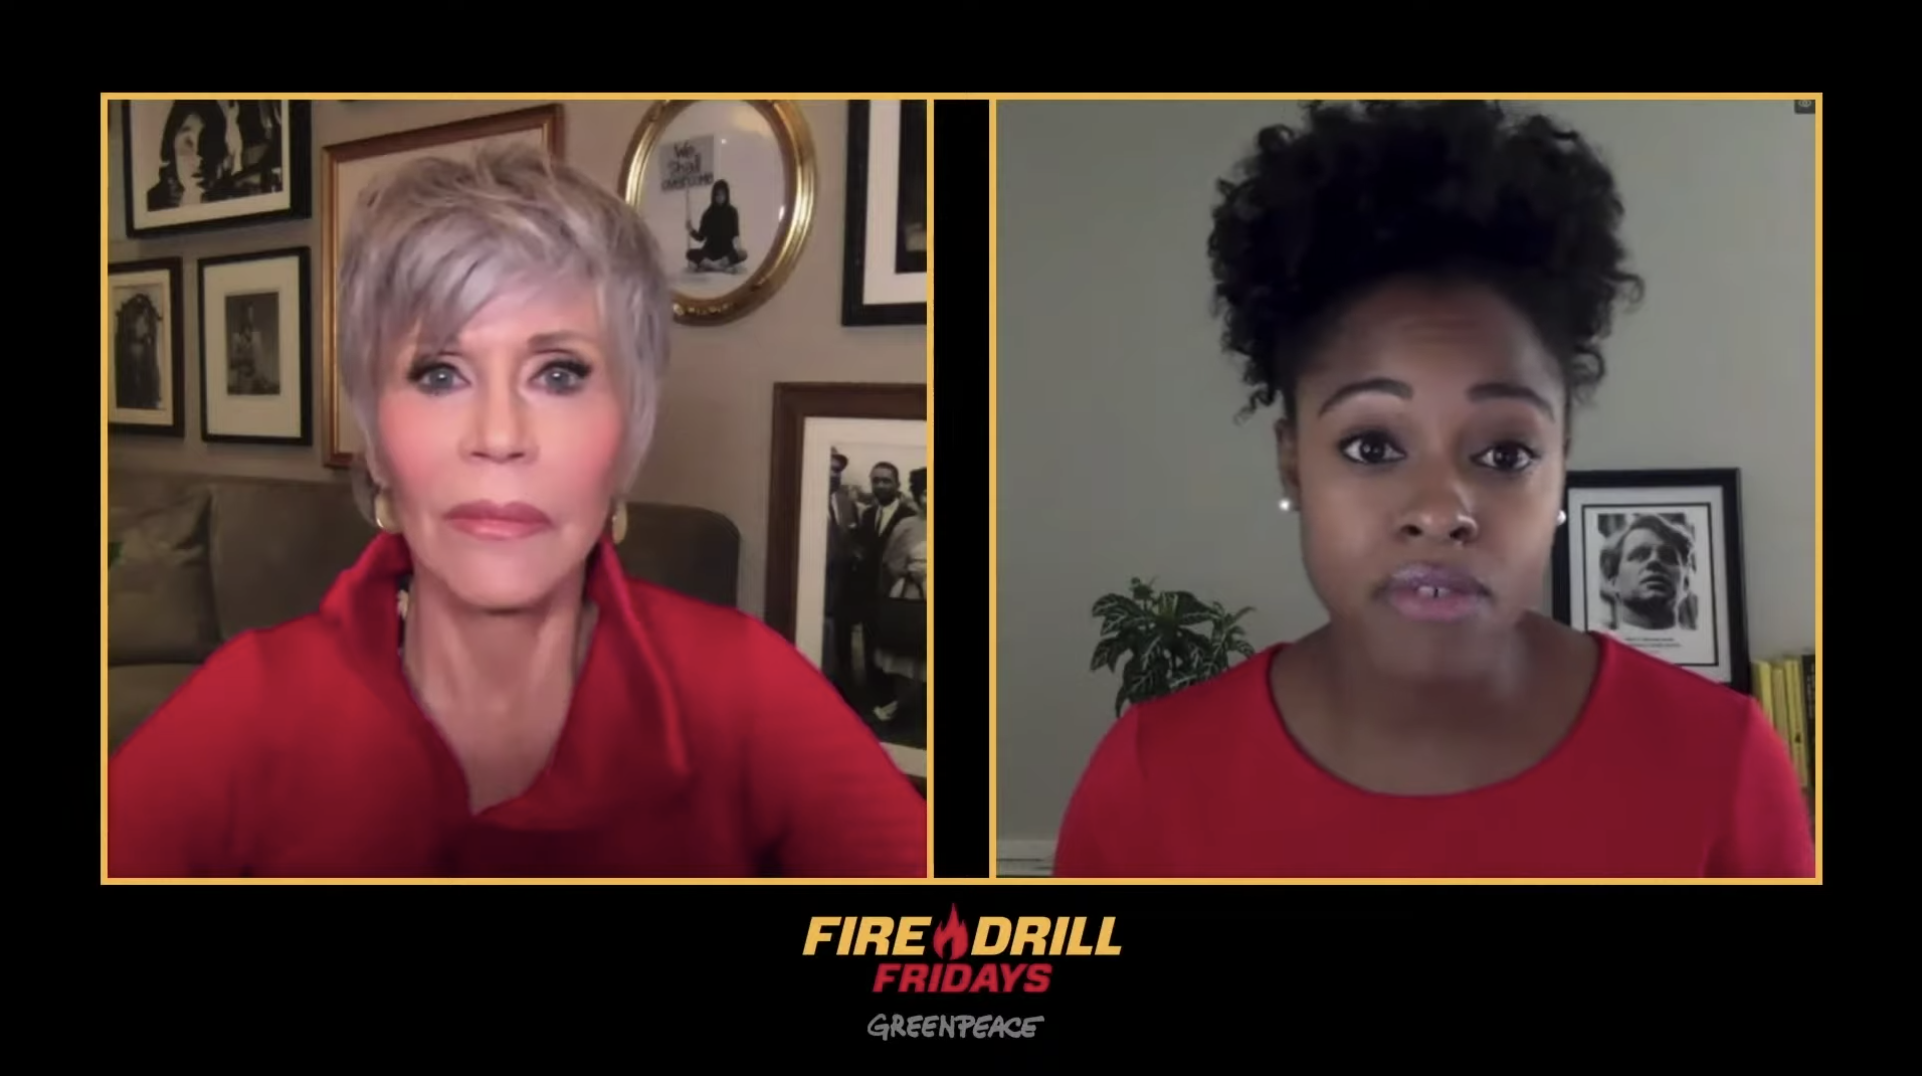 Watch Fireside Fire Drill with Shaniqua McClendon